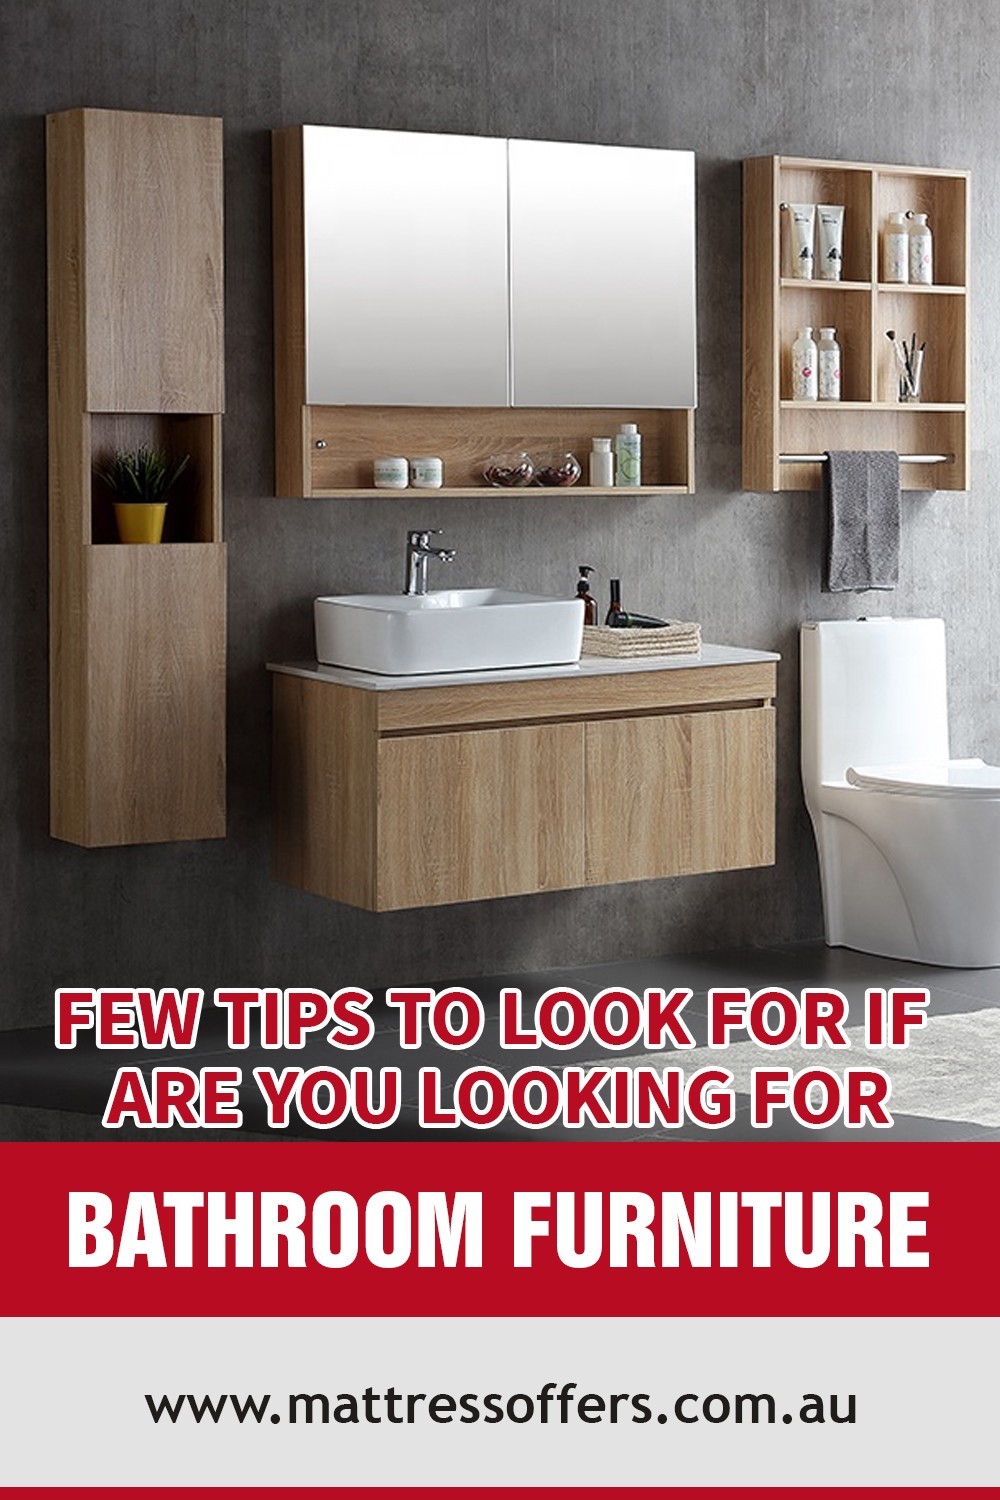 Few Tips to Look for If Are You Looking For Bathroom Furniture